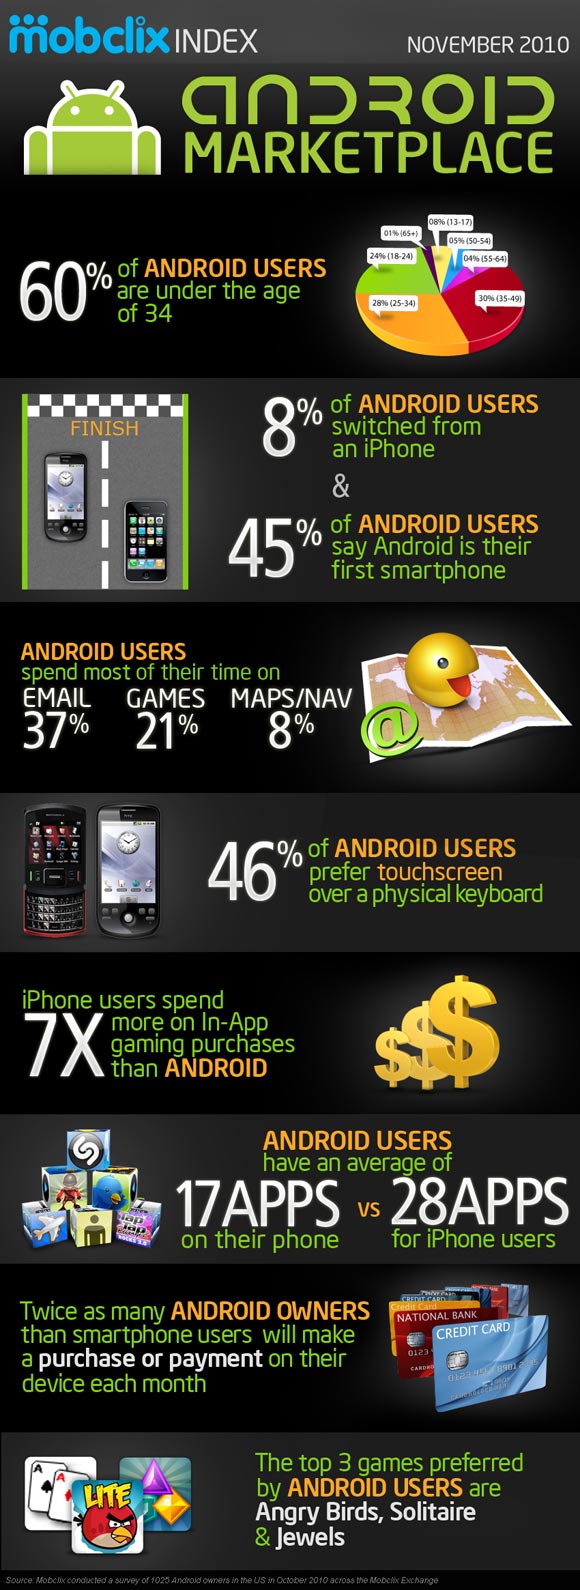 Android users prefer QWERTY keyboards, love Angry Birds (study)